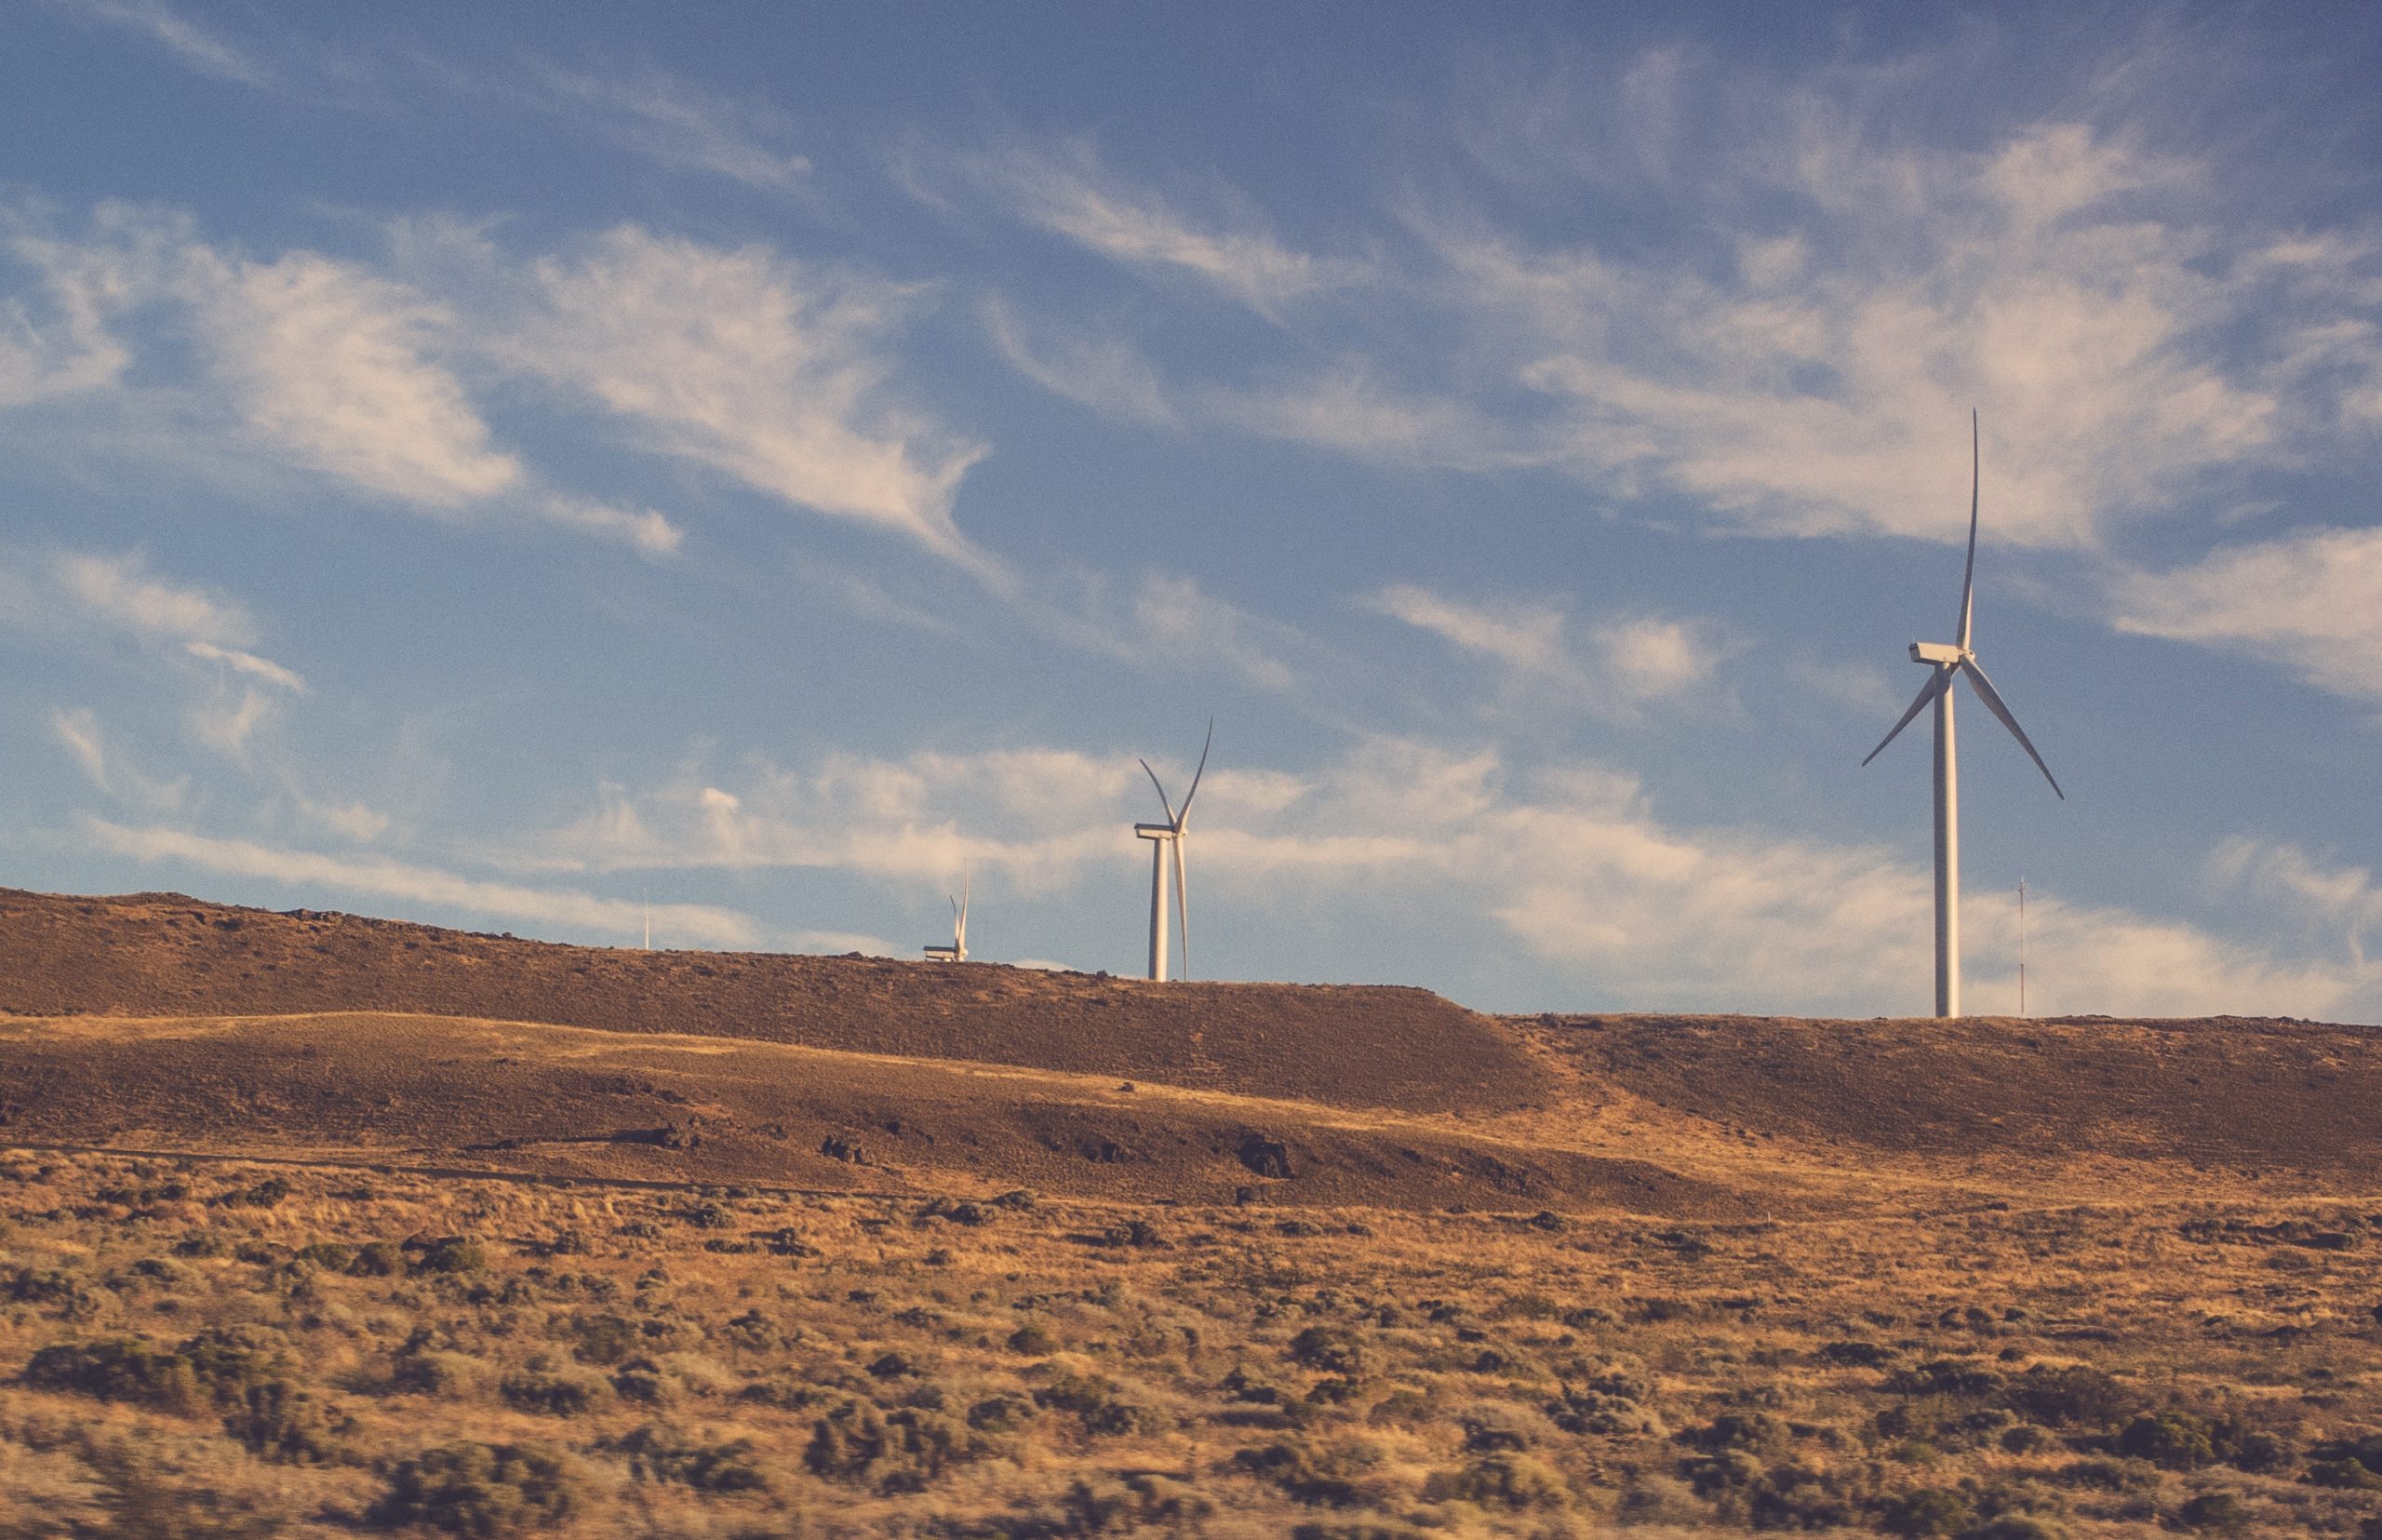 Successful 2nd Issuance for UPM’s Foundation I and II 50 MW Wind Projects in Pakistan